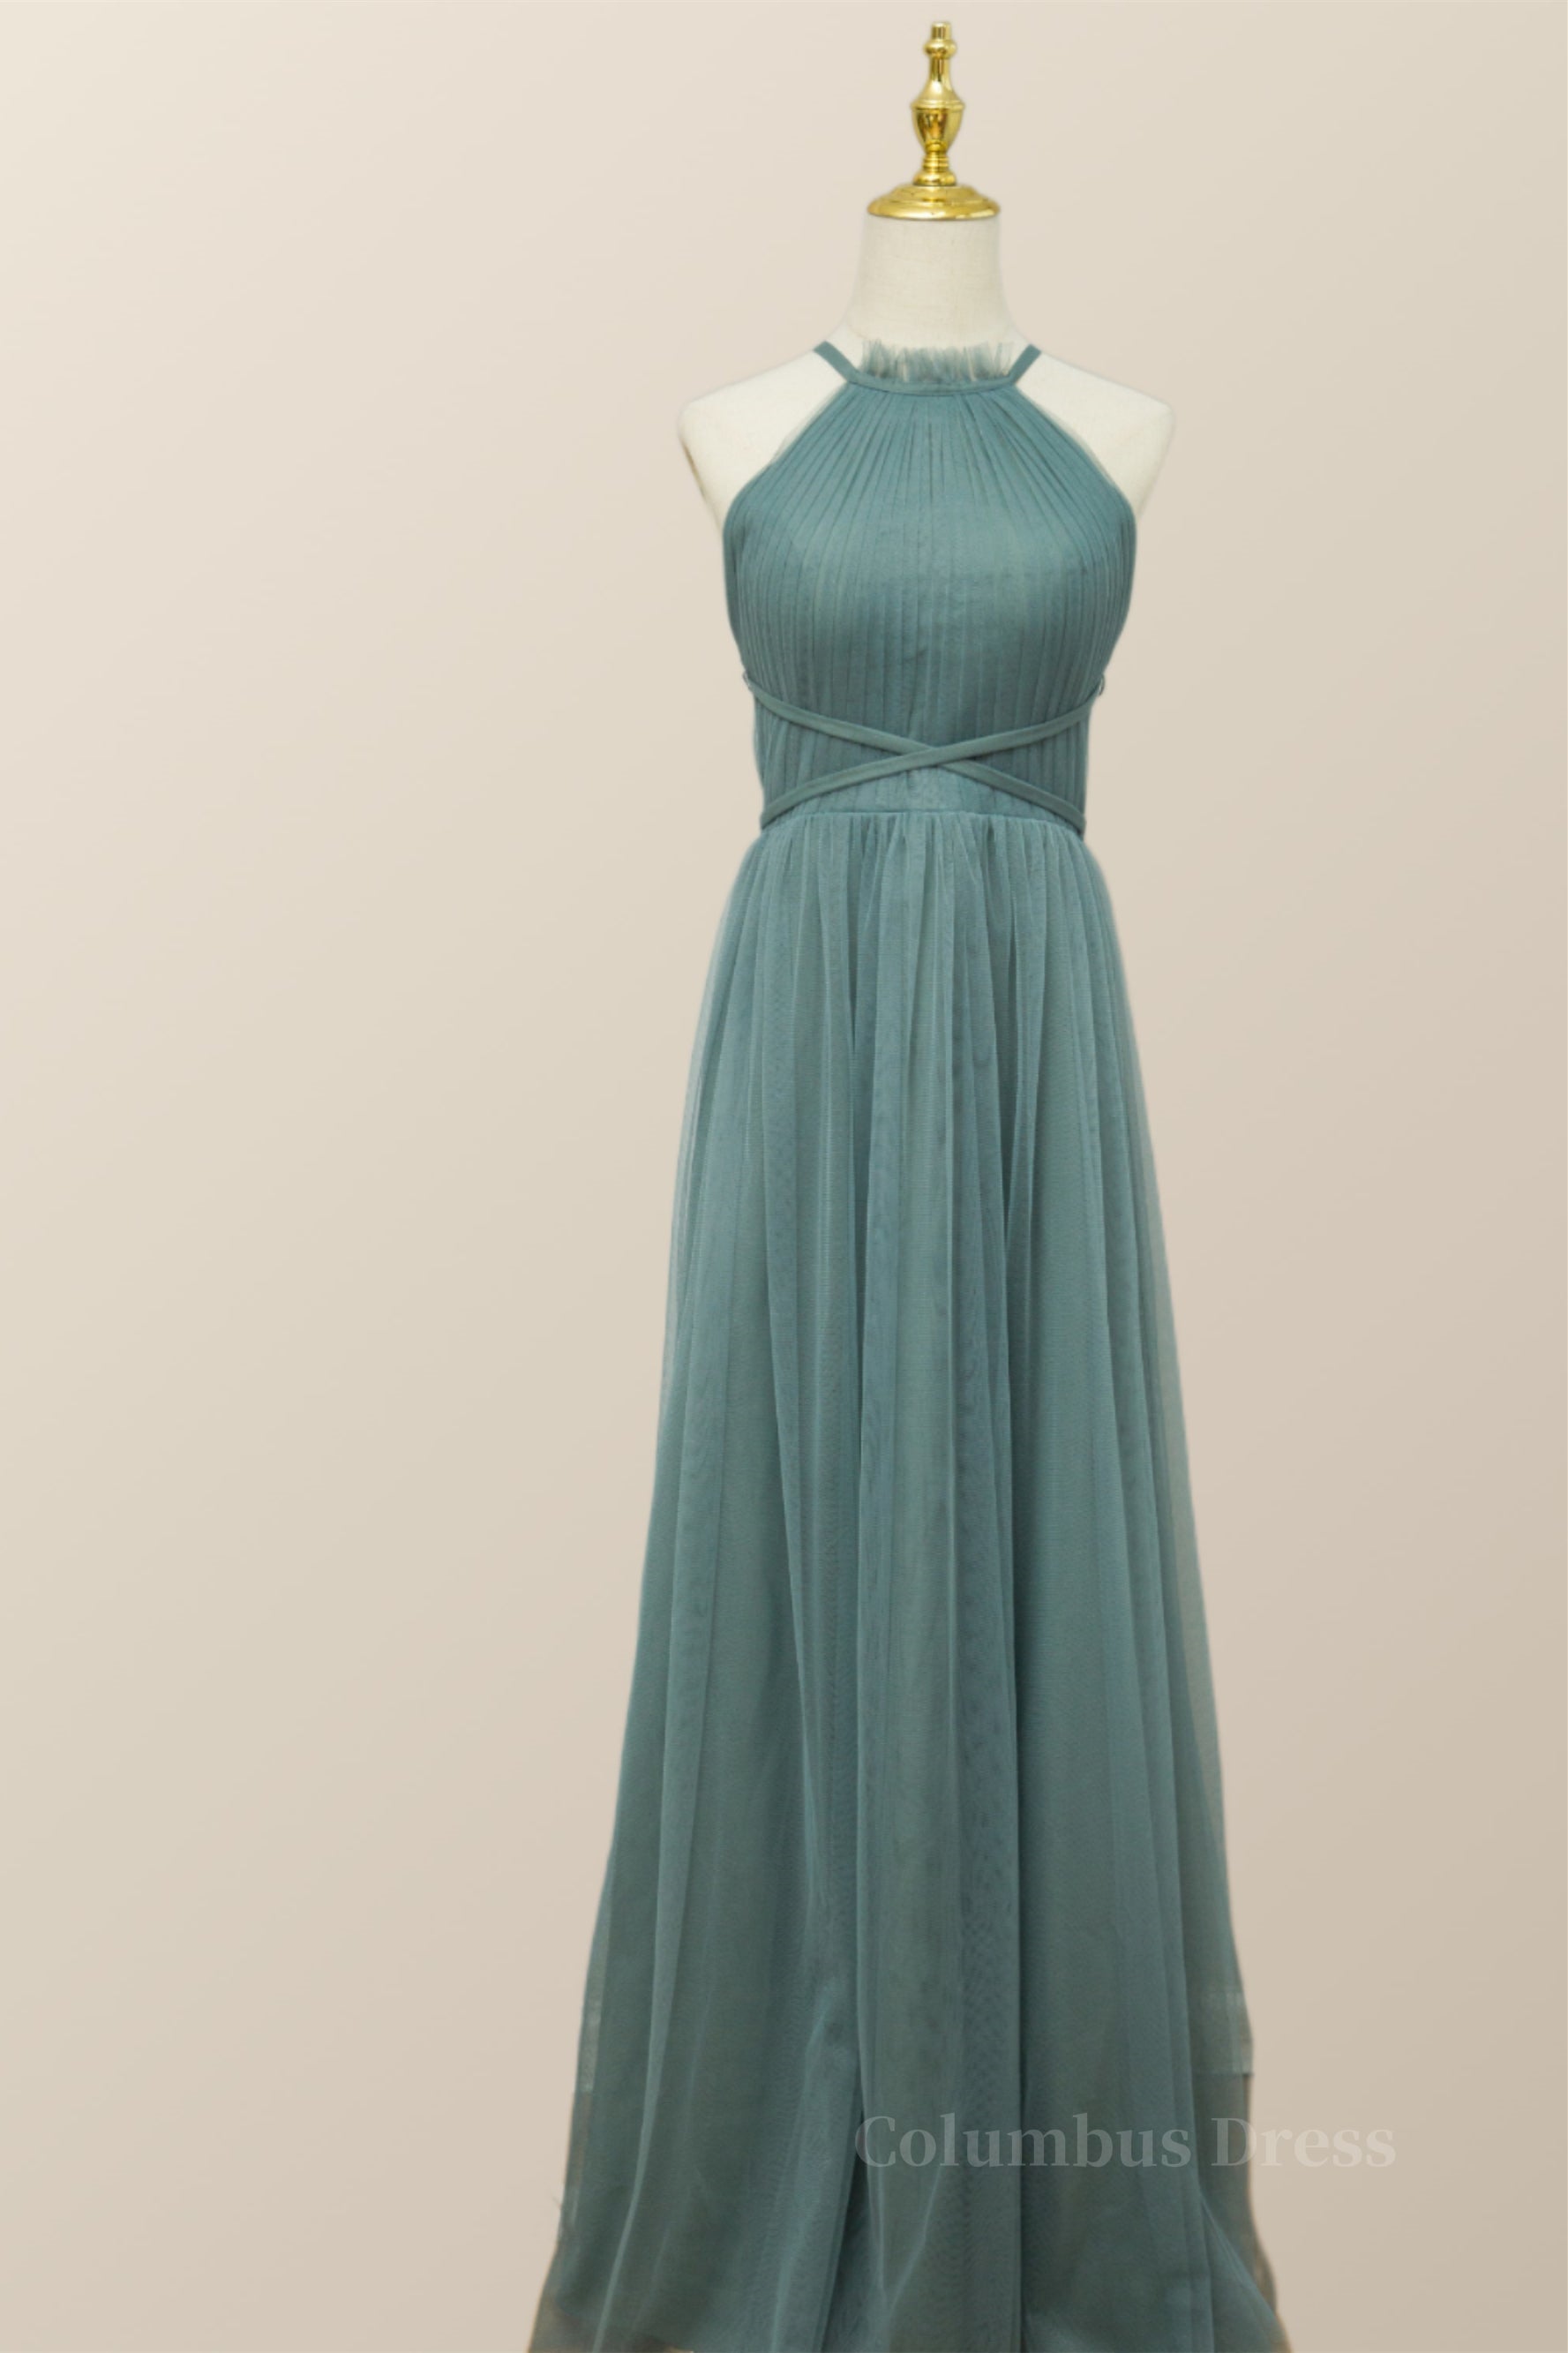 Sea Glass Tulle Corset Bridesmaid Dress with Cross Back Gowns, Prom Dress Boutiques